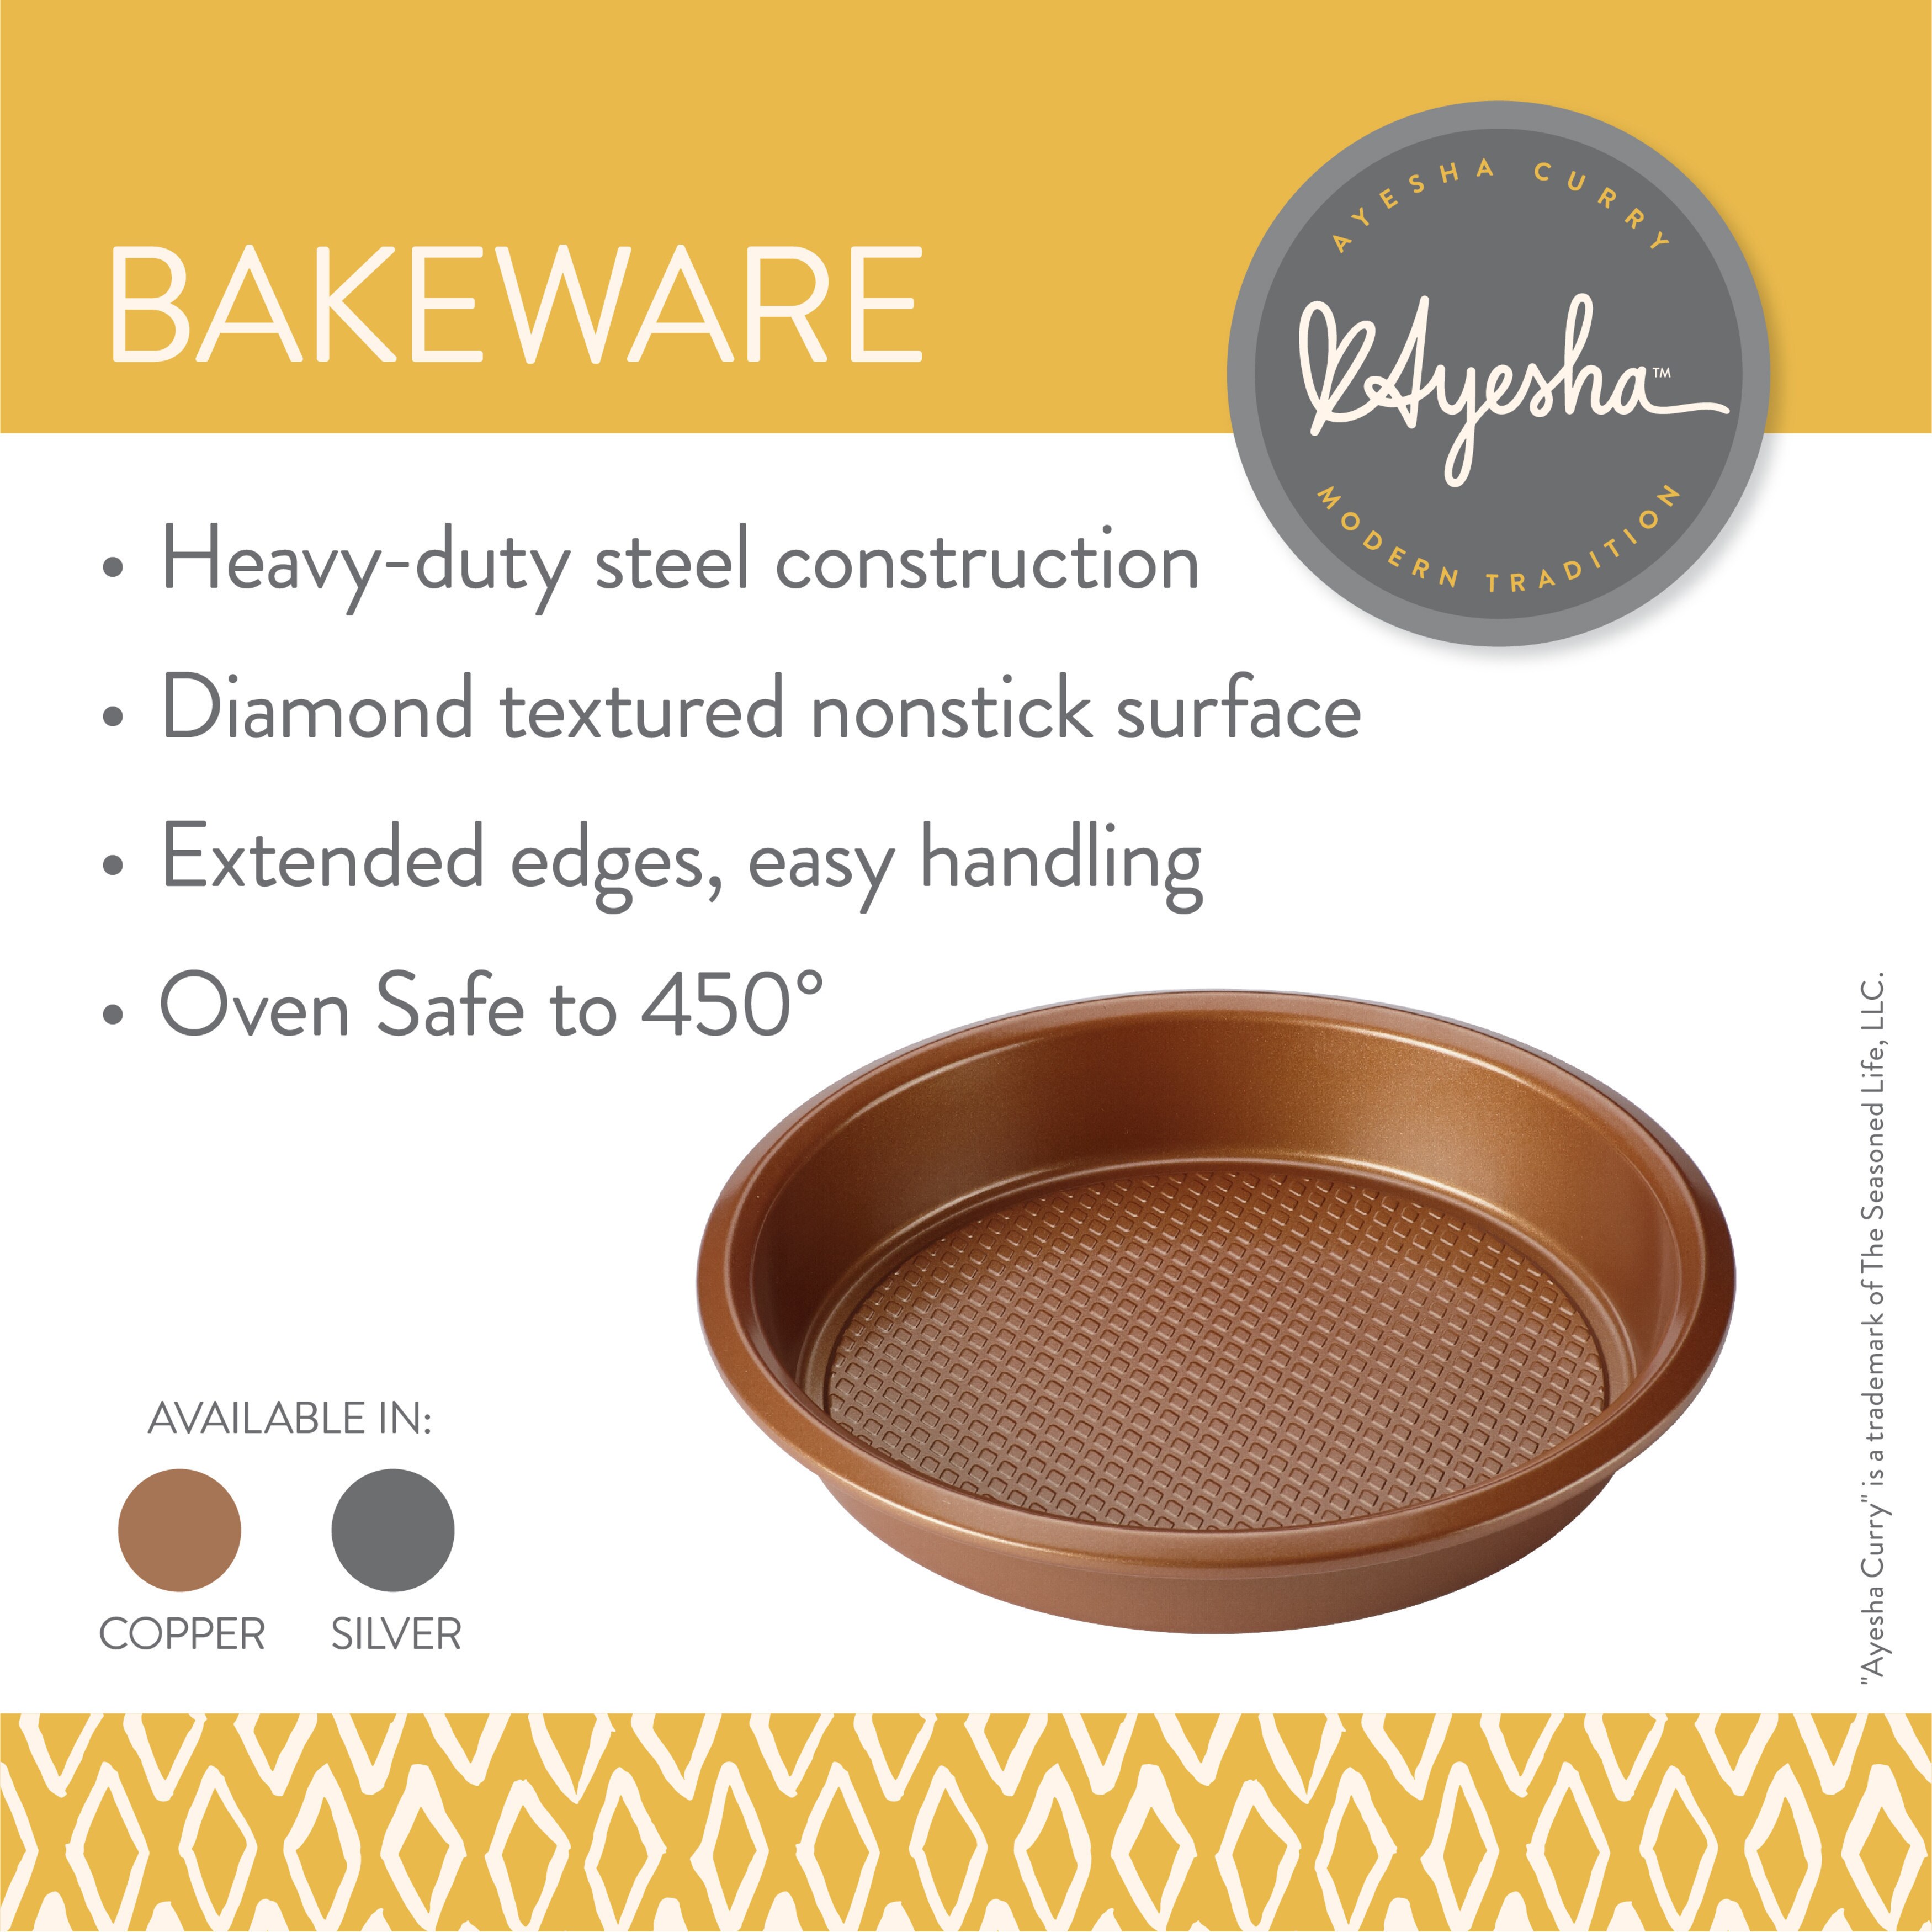 https://ak1.ostkcdn.com/images/products/20007003/Ayesha-Curry-Bakeware-Covered-Cake-Pan-9-Inch-x-13-Inch-Copper-3d624cae-bed6-451a-b58b-ed4253befebf.jpg